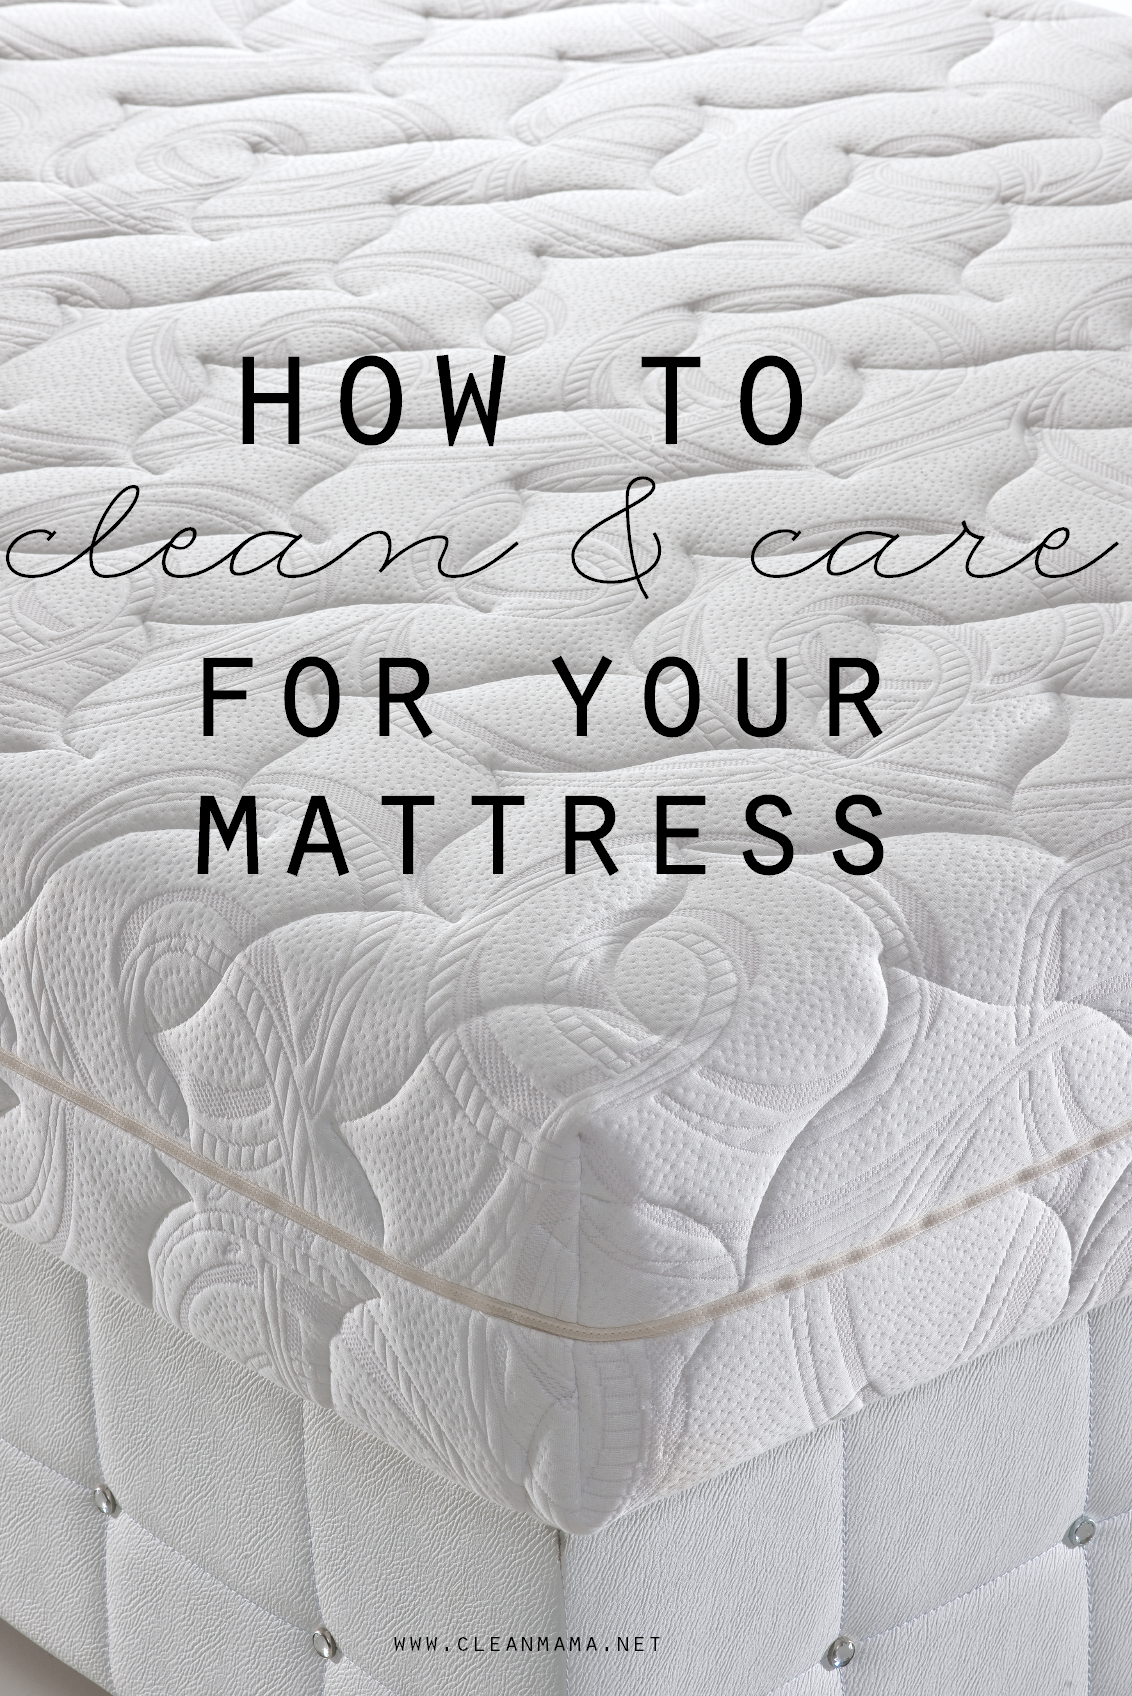 Now is the perfect time to freshen up and clean your mattress. Try these tips for success!